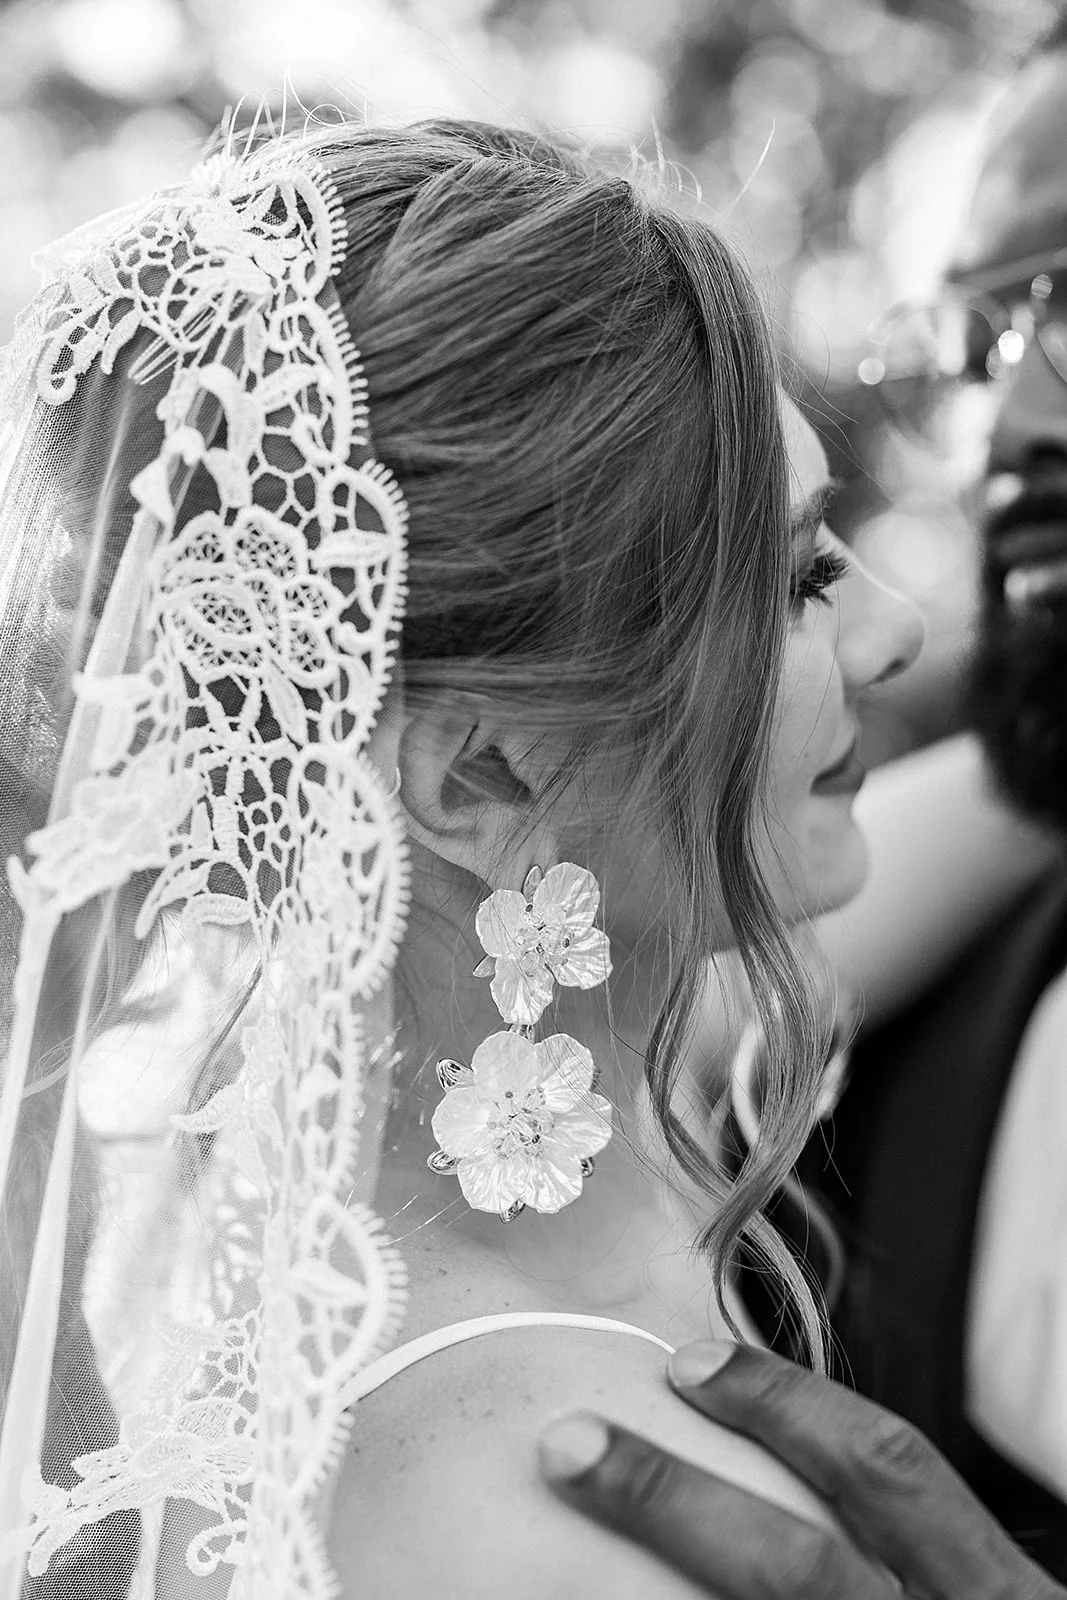 Details of a bride's lace veil as she hugs her groom